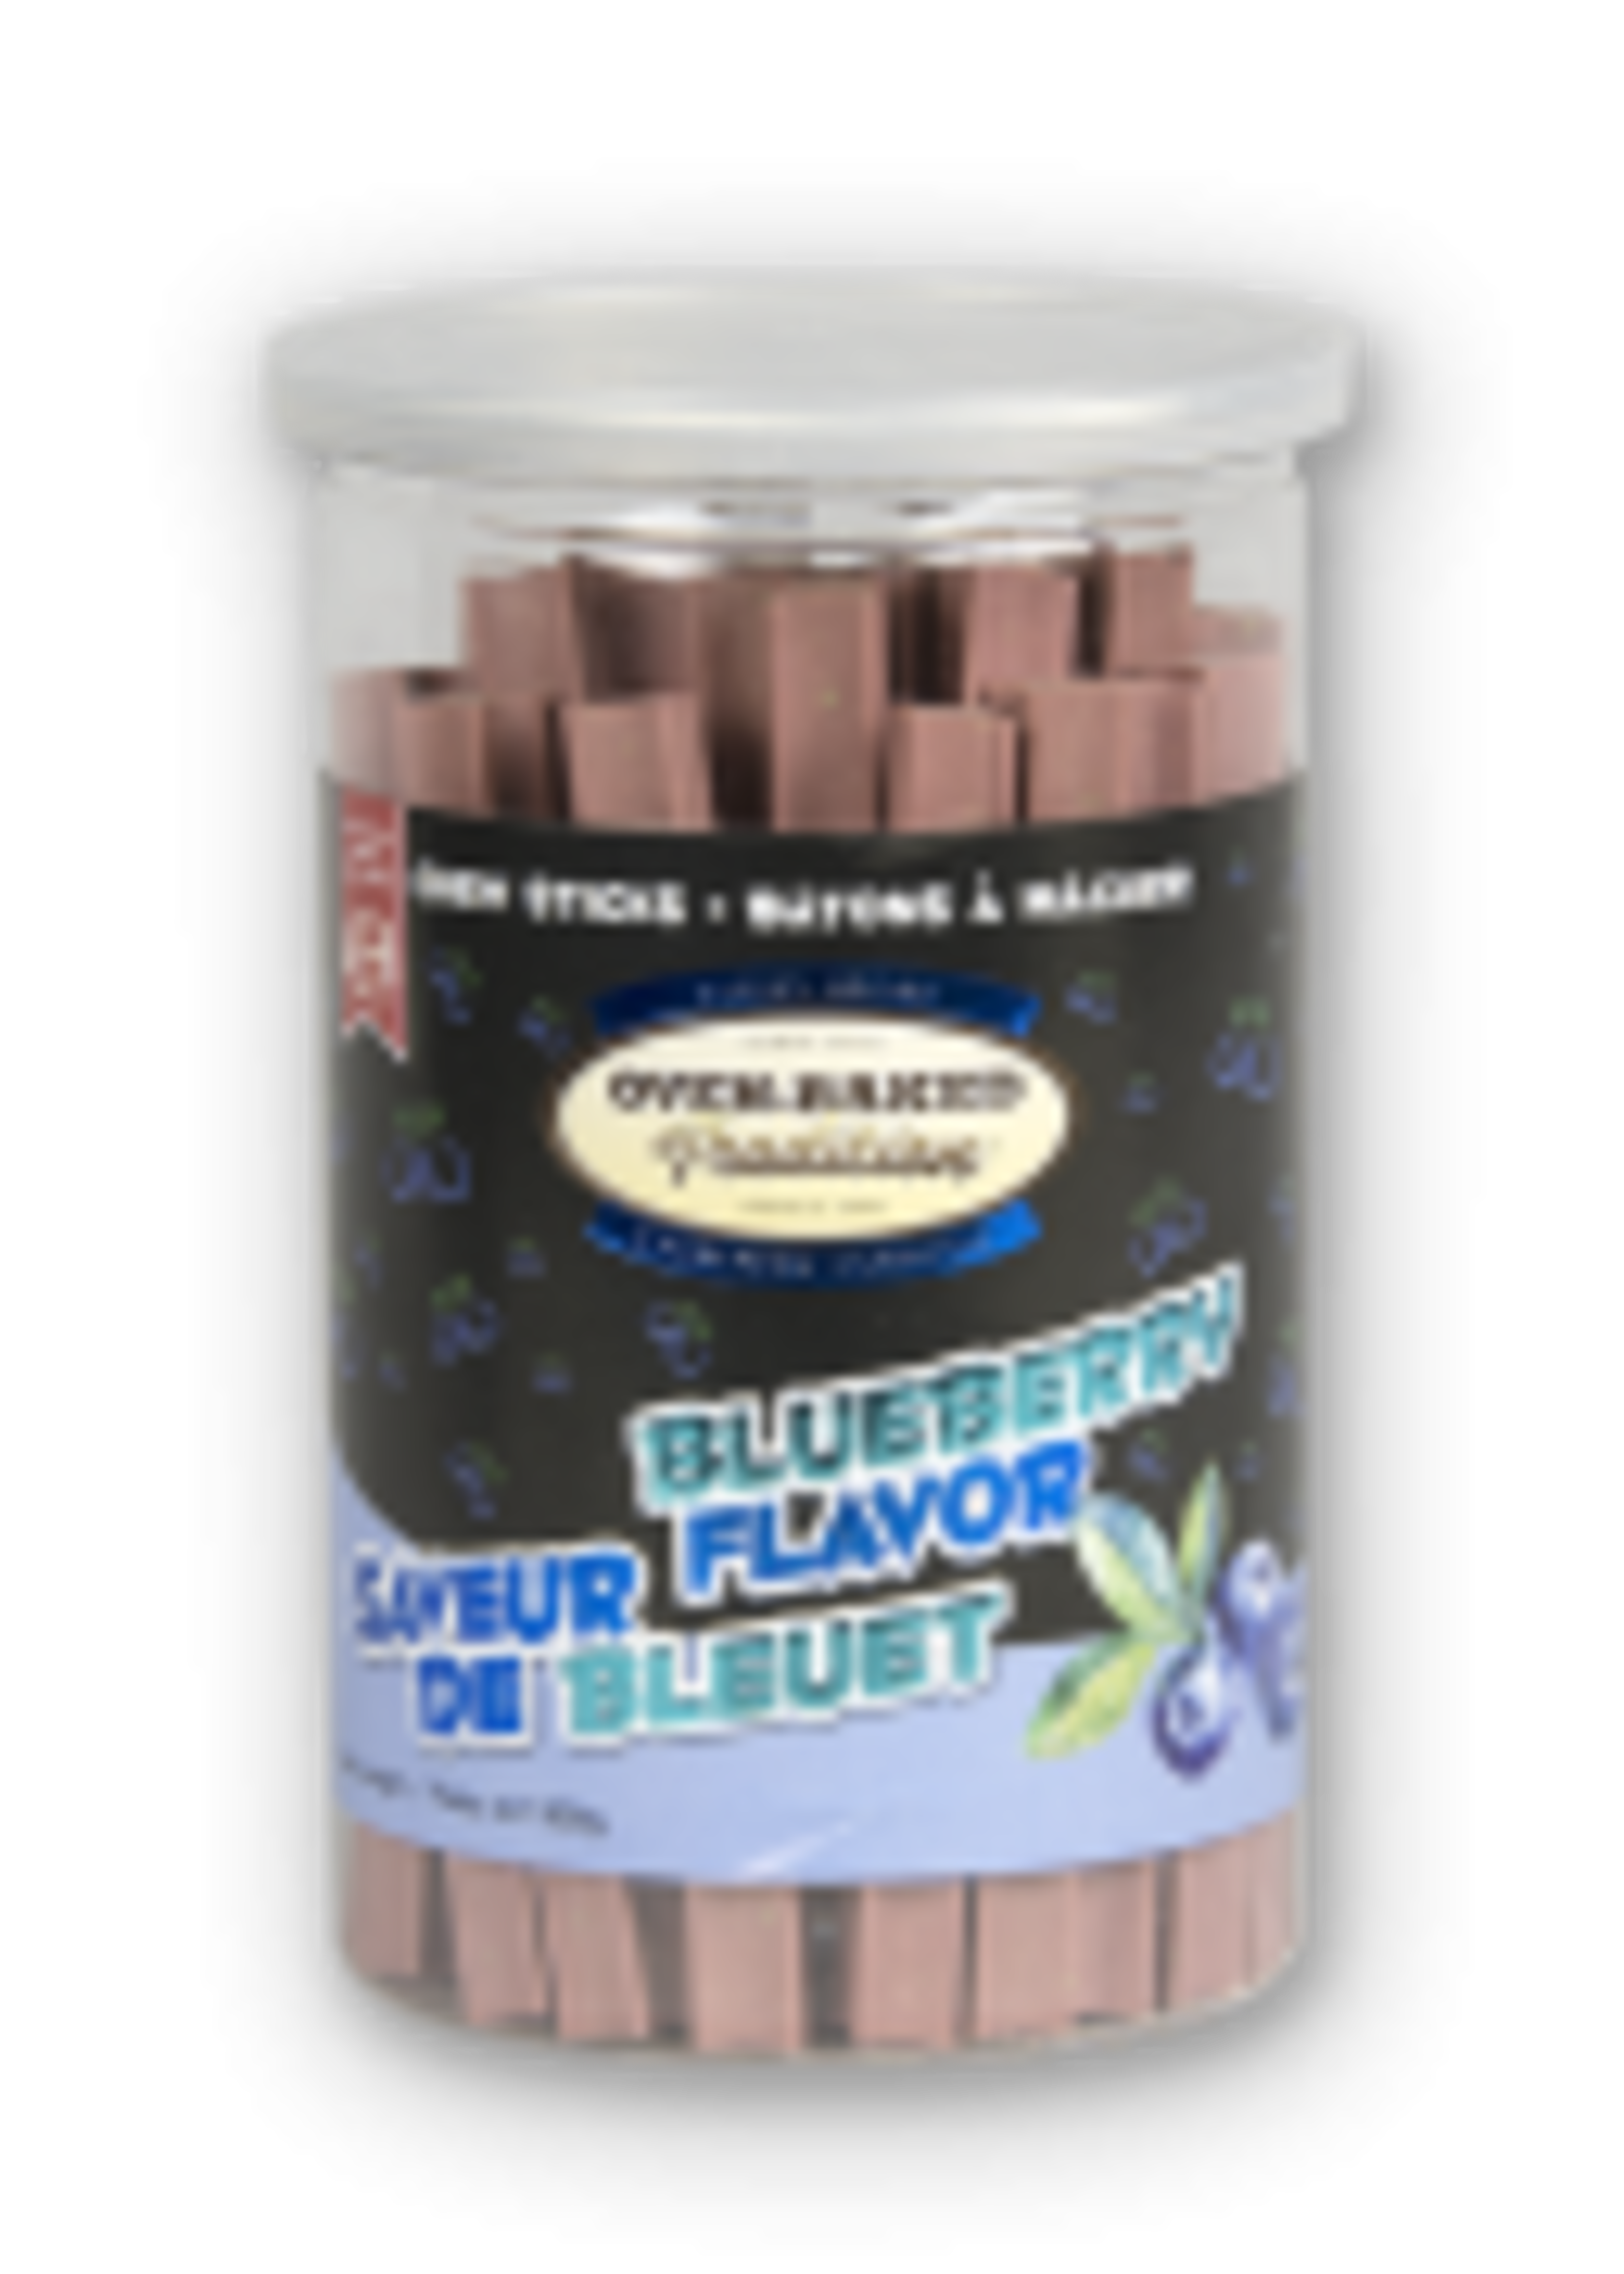 Ovenbaked Tradition Oven-Baked Tradition Blueberry Chew Sticks 500g Whole Tub